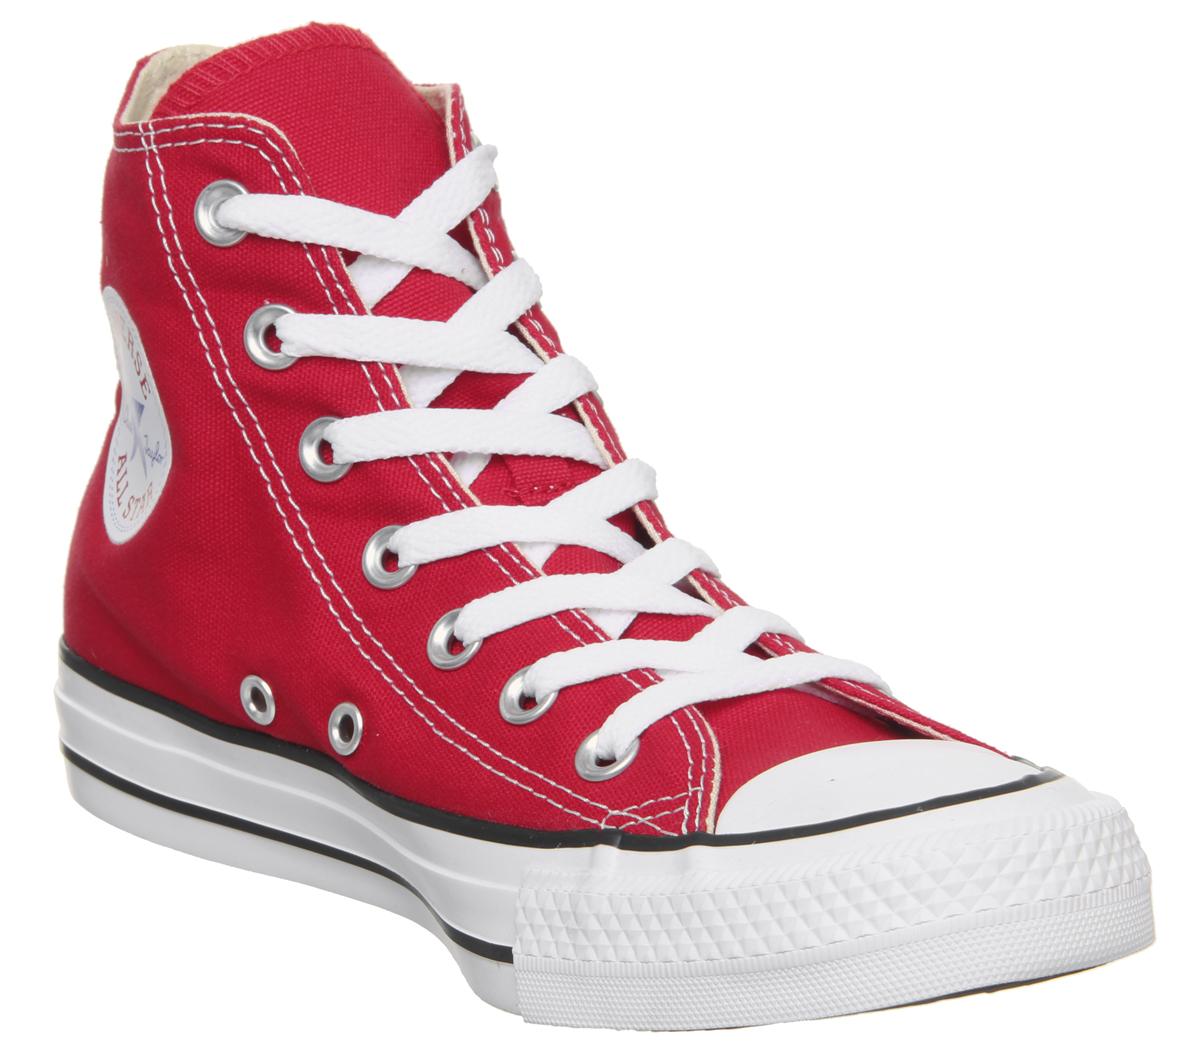 red converse high tops size 6